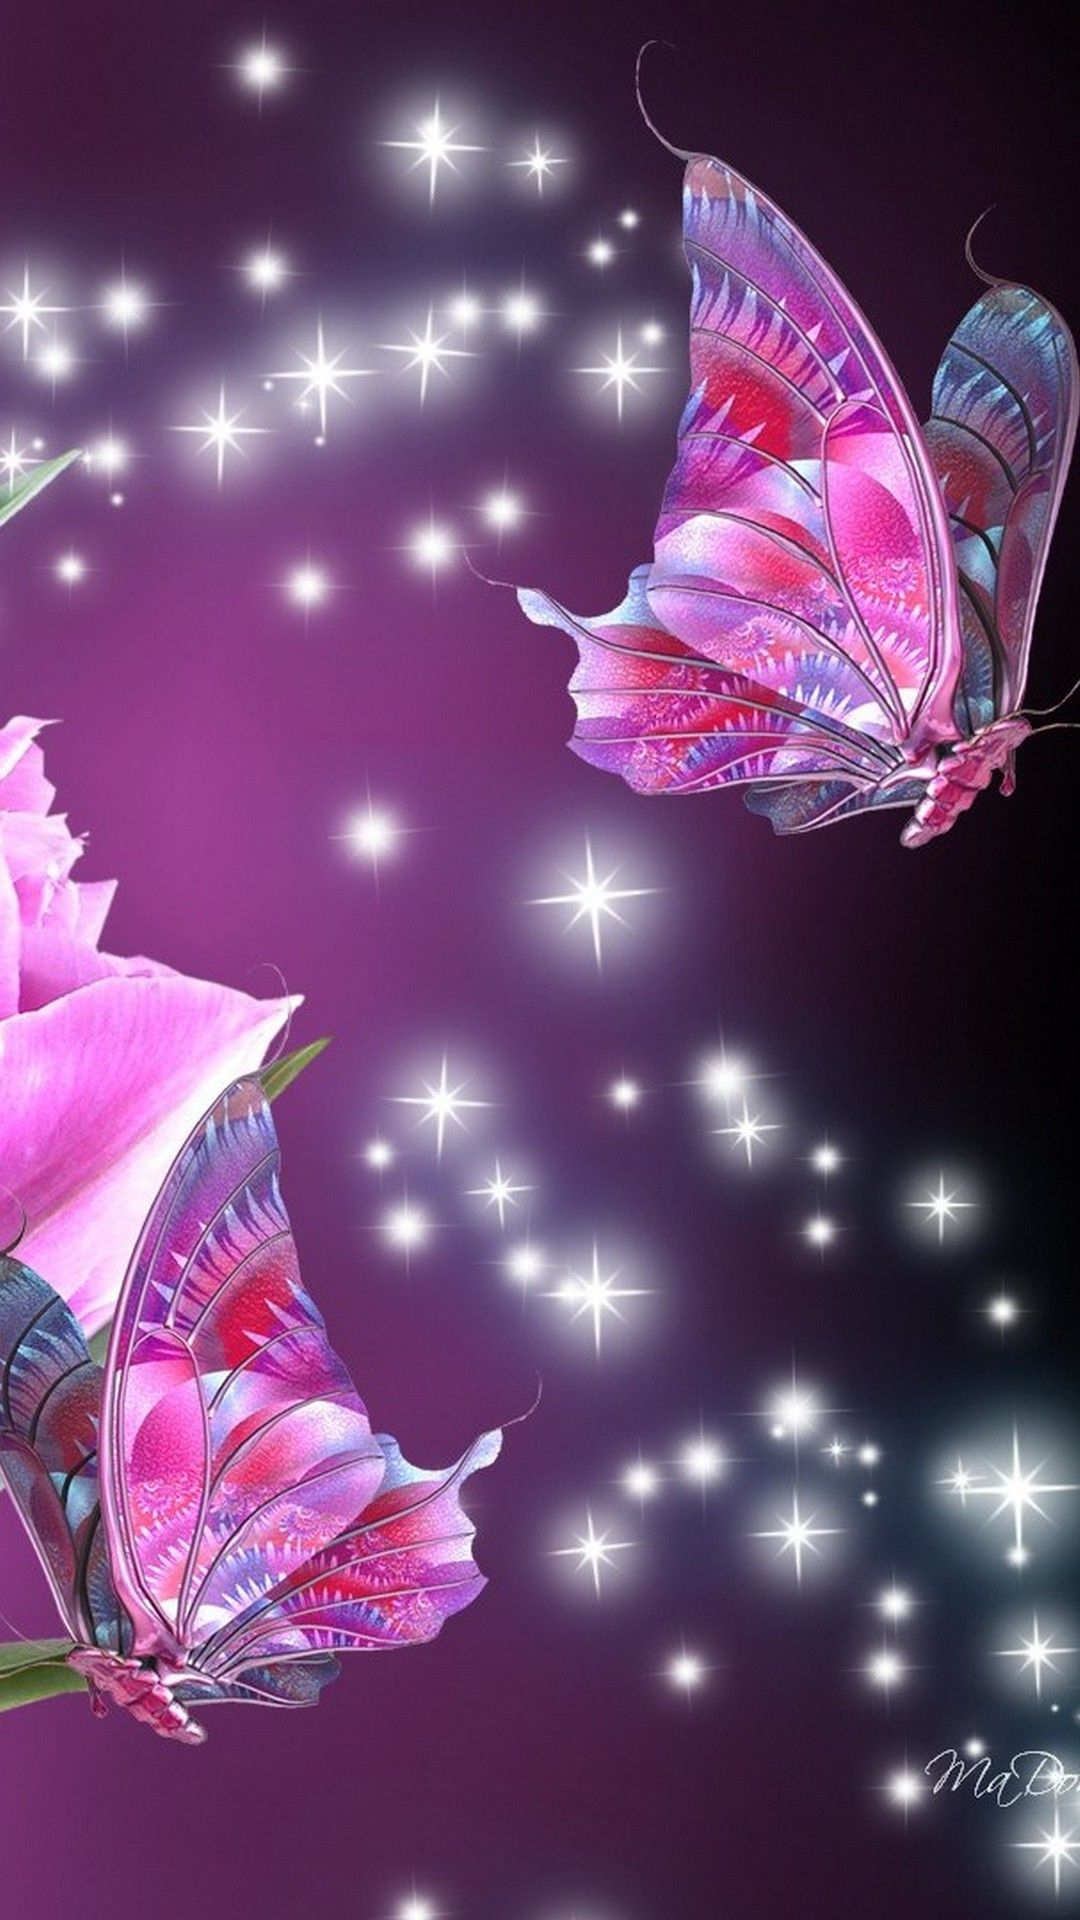 1080x1920 Pink Butterfly Phone Backgrounds | Best HD Wallpapers | Butterfly wallpaper, Butterfly wallpaper backgrounds, Purple butterfly wallpaper